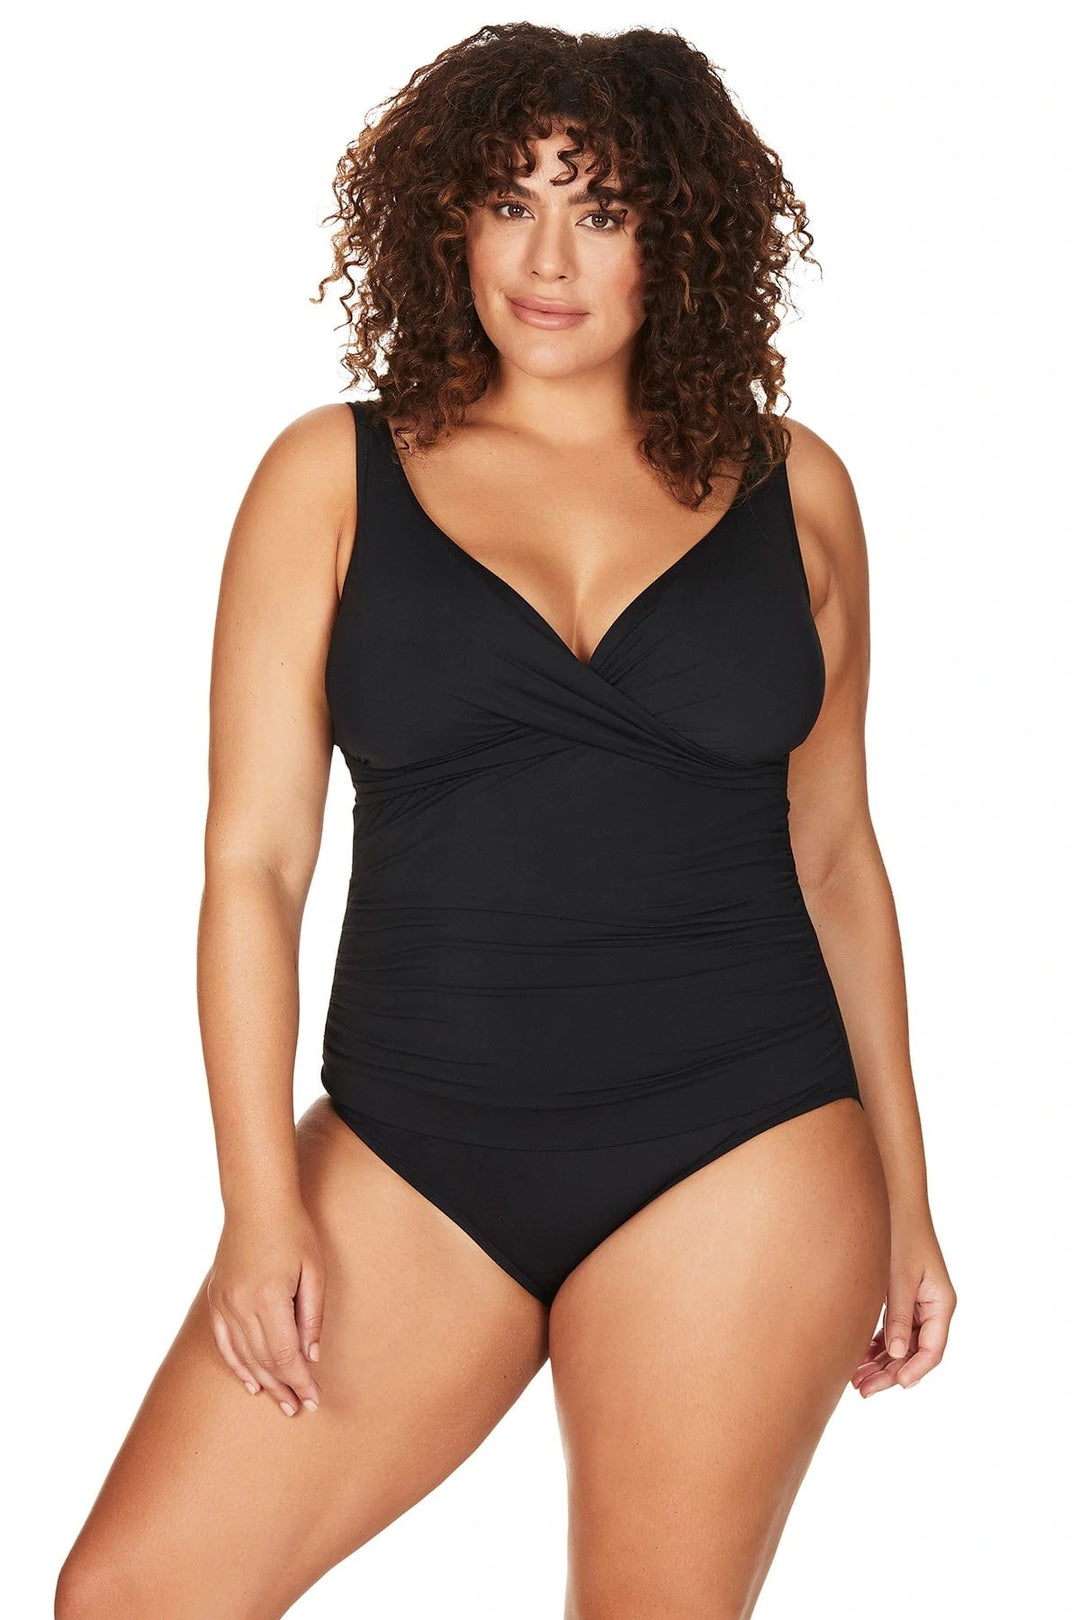 Recycled Hues Black Delacroix One Piece